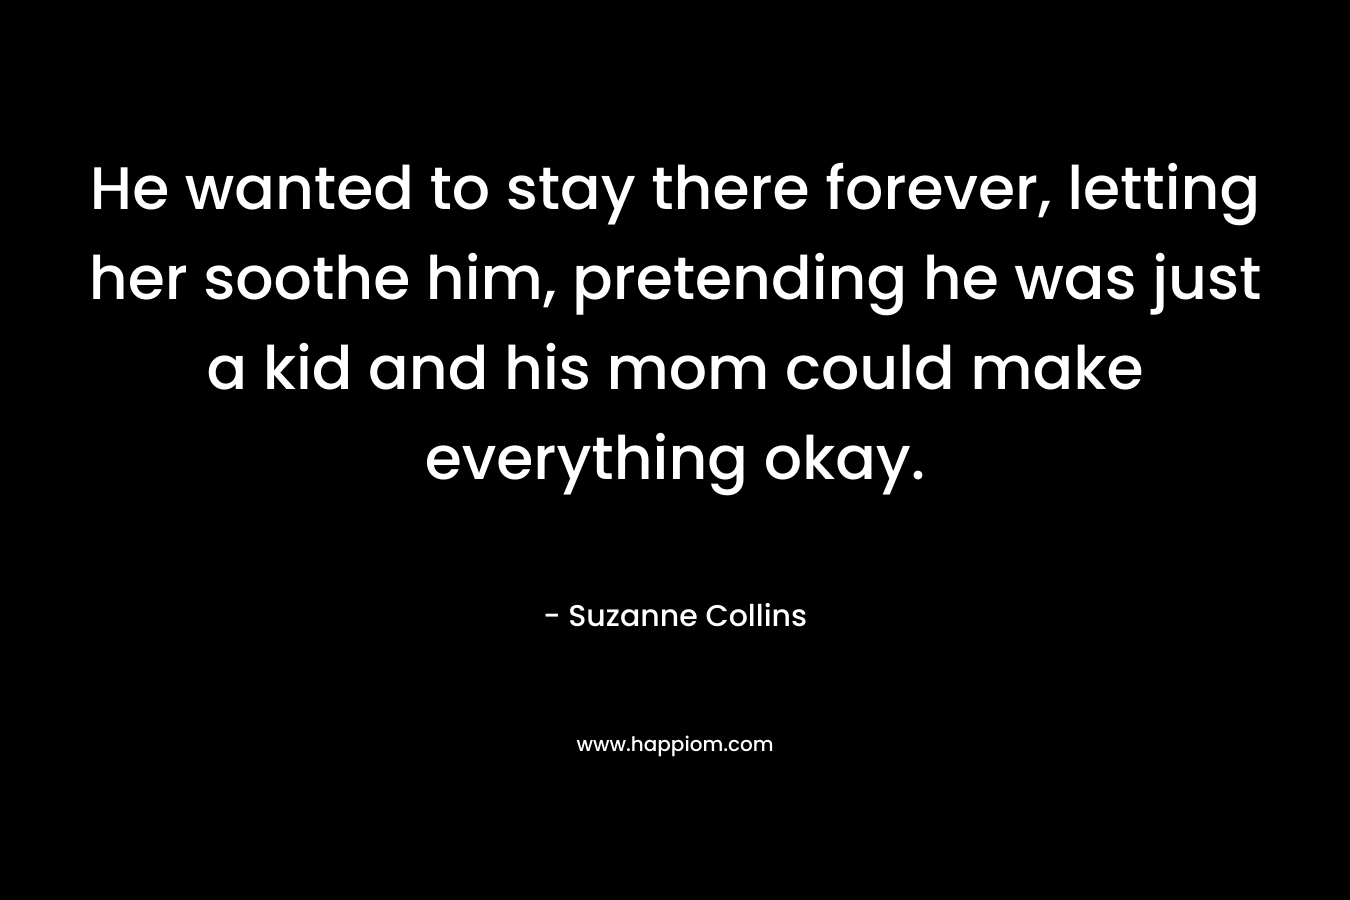 He wanted to stay there forever, letting her soothe him, pretending he was just a kid and his mom could make everything okay. – Suzanne Collins